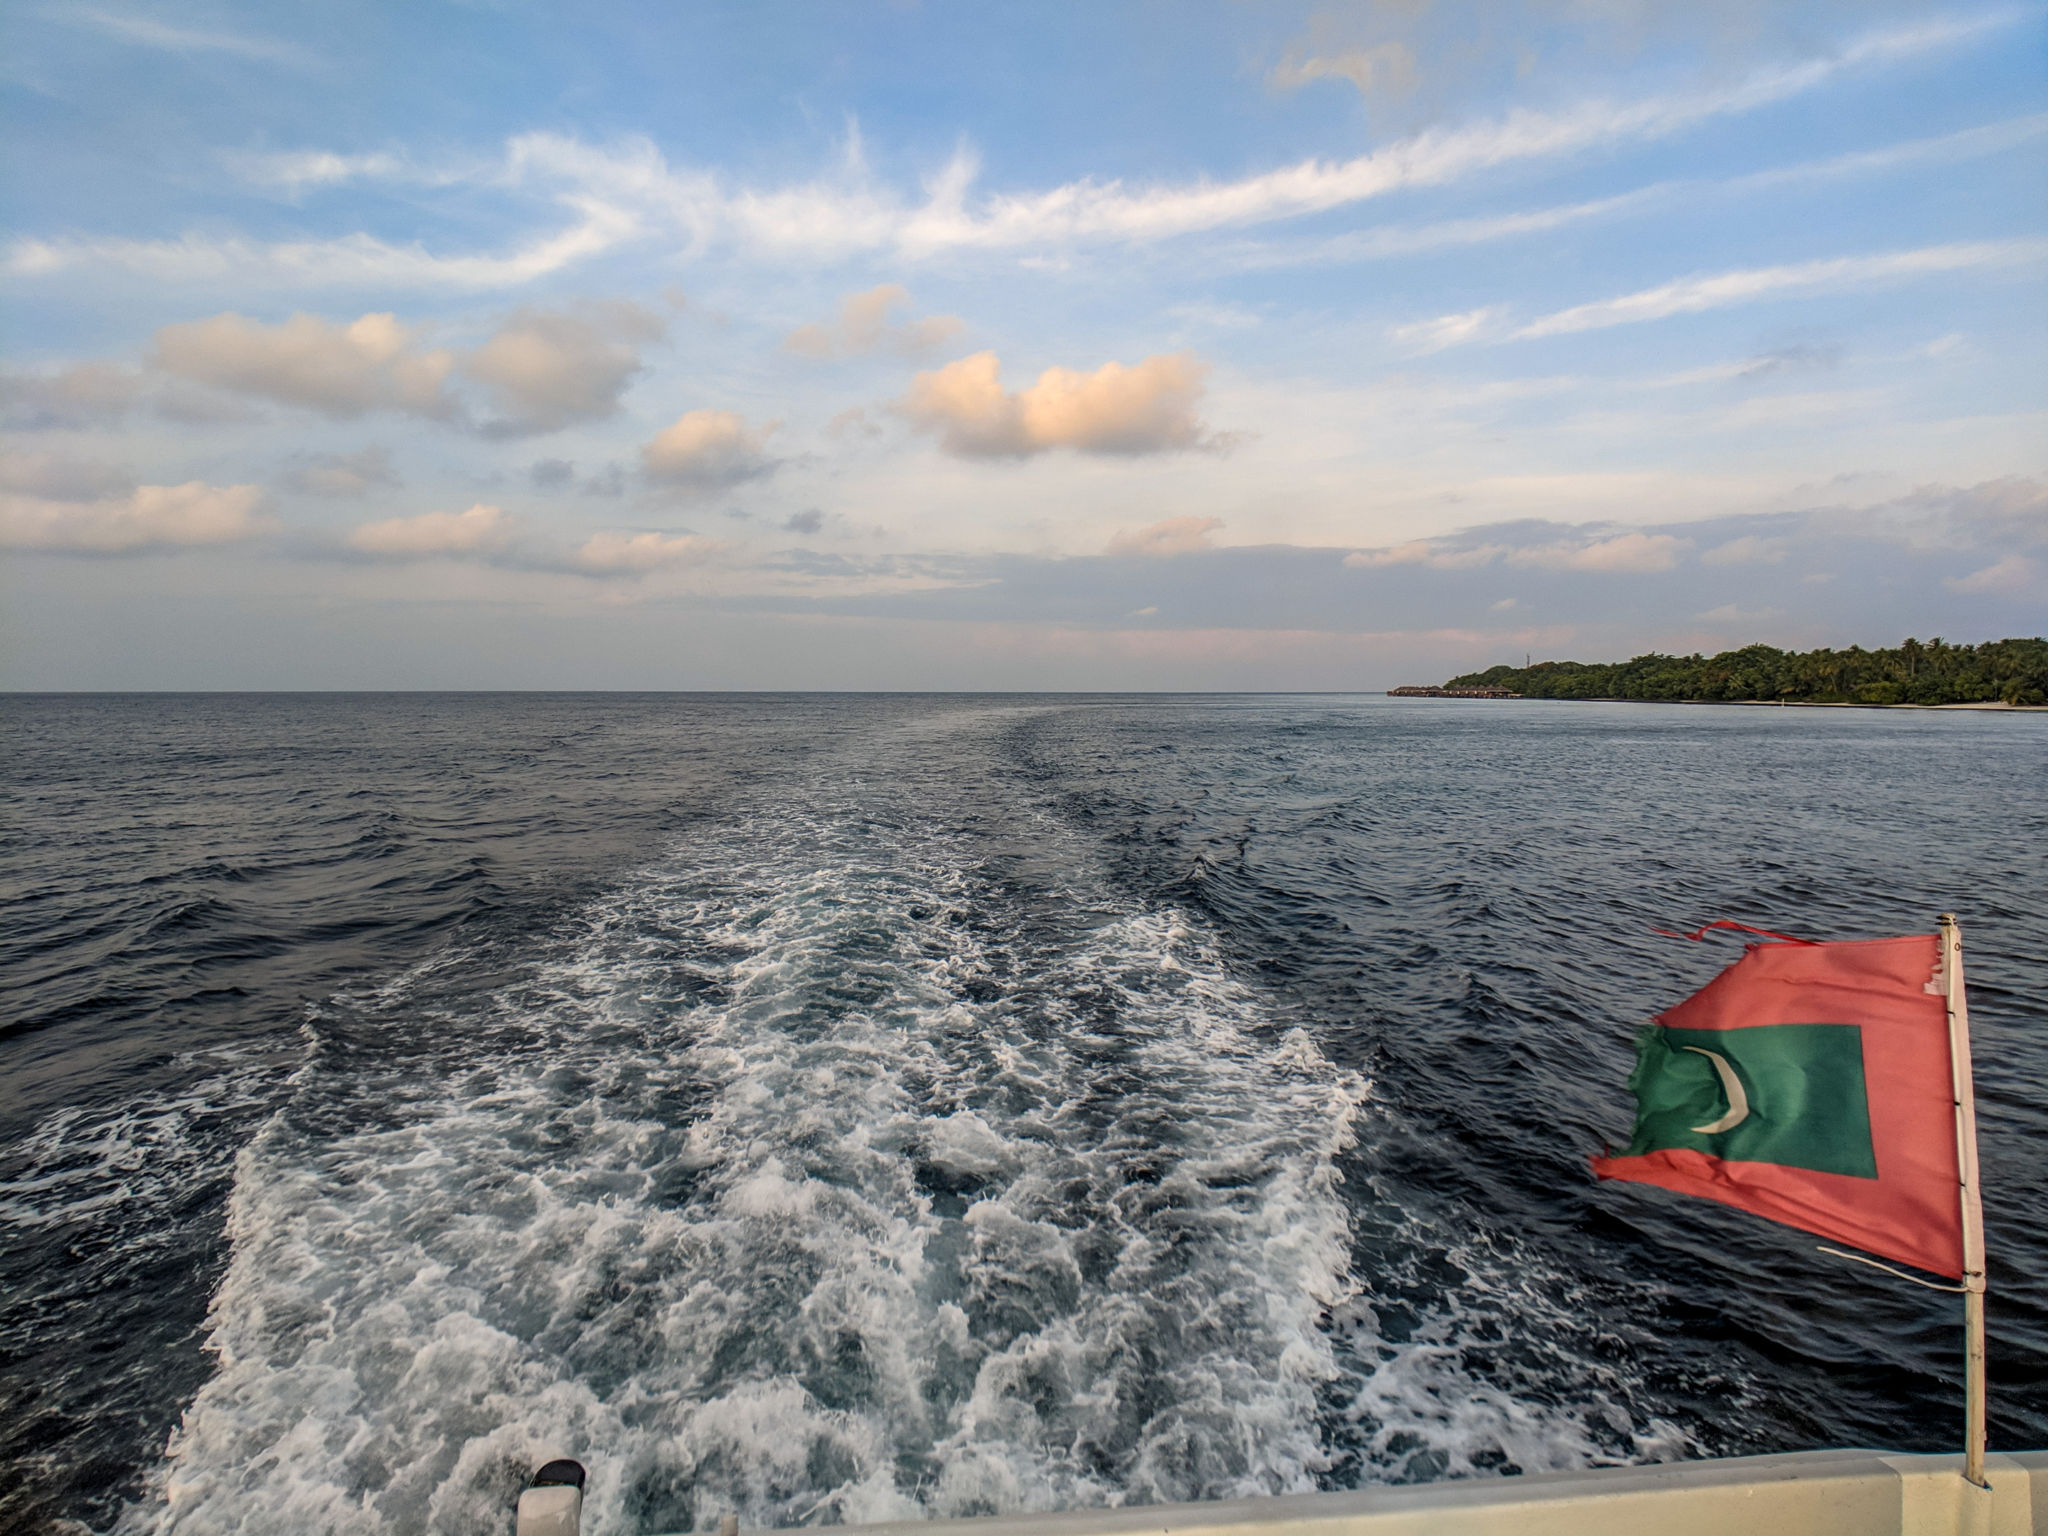 2022 COVID-19 GUIDE Public Speedboat to the Local Islands of The Mulakatholhu & Meemu Atoll Maldives – A Complete Guide